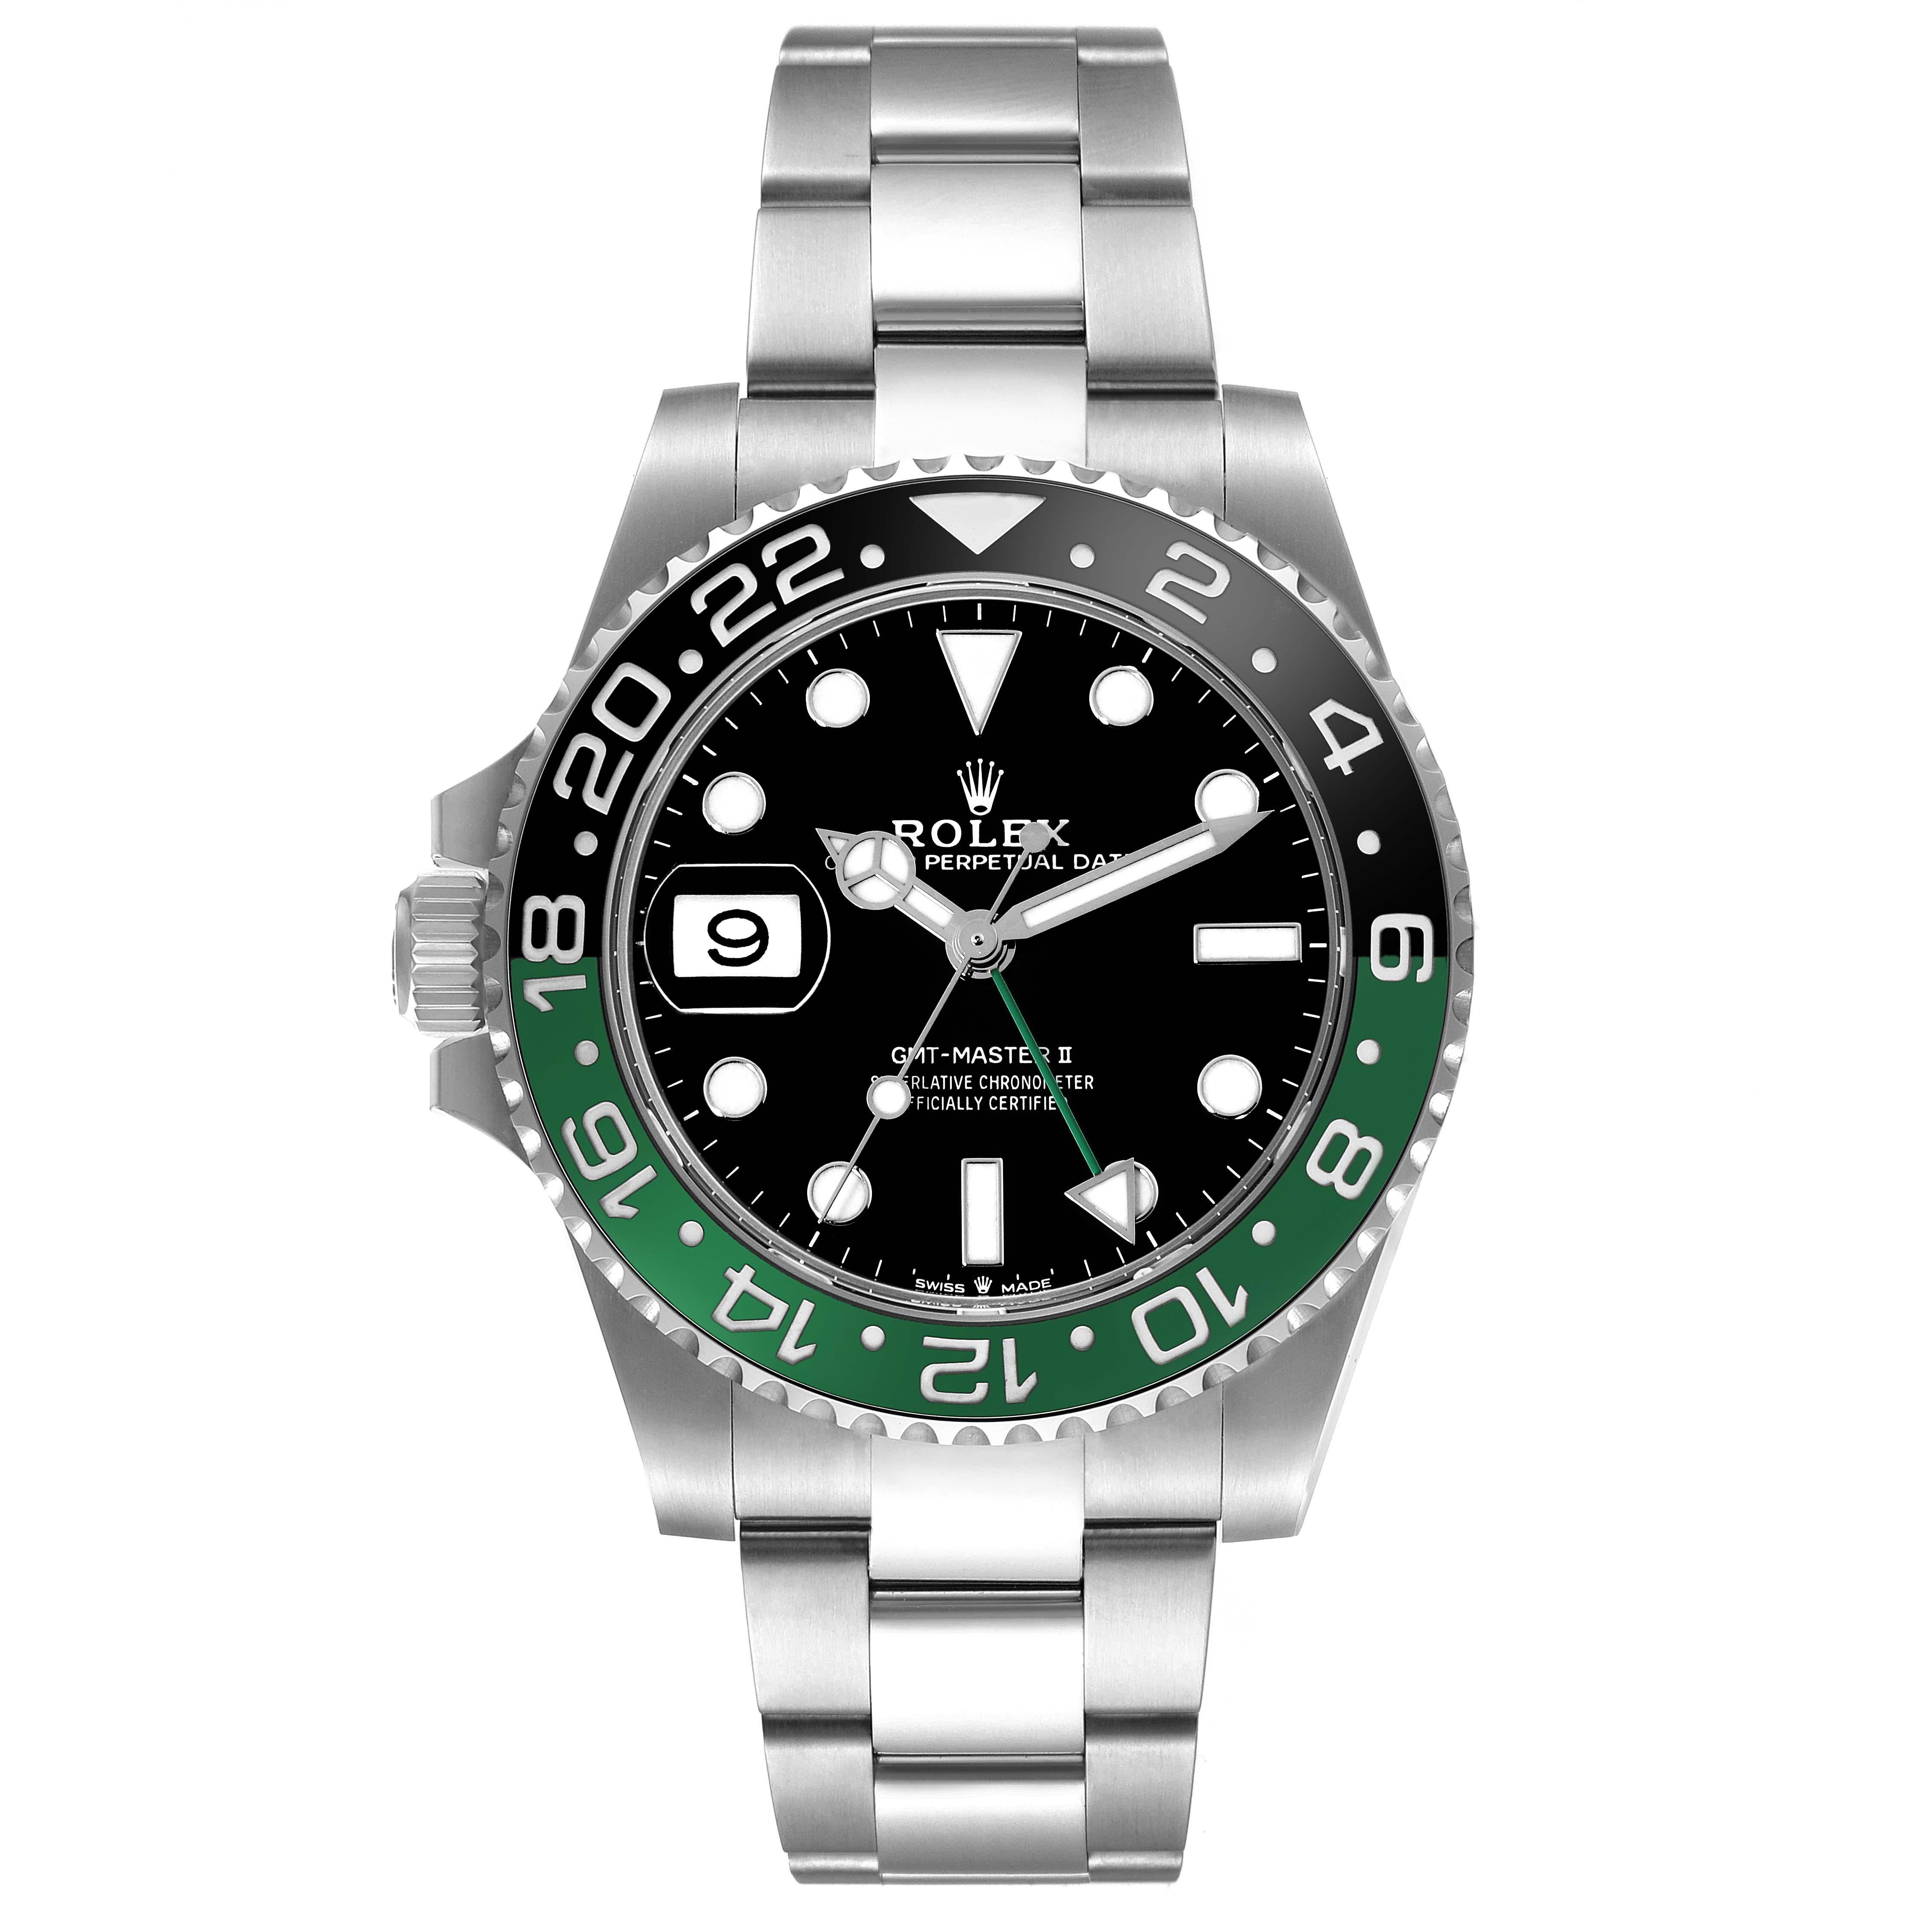 Rolex GMT Master II Sprite Bezel Oyster Steel Mens Watch 126720 Unworn. Officially certified chronometer self-winding movement. Stainless steel case 40 mm in diameter. Rolex logo on a crown. Stainless steel bidirectional rotating 24-hour graduated